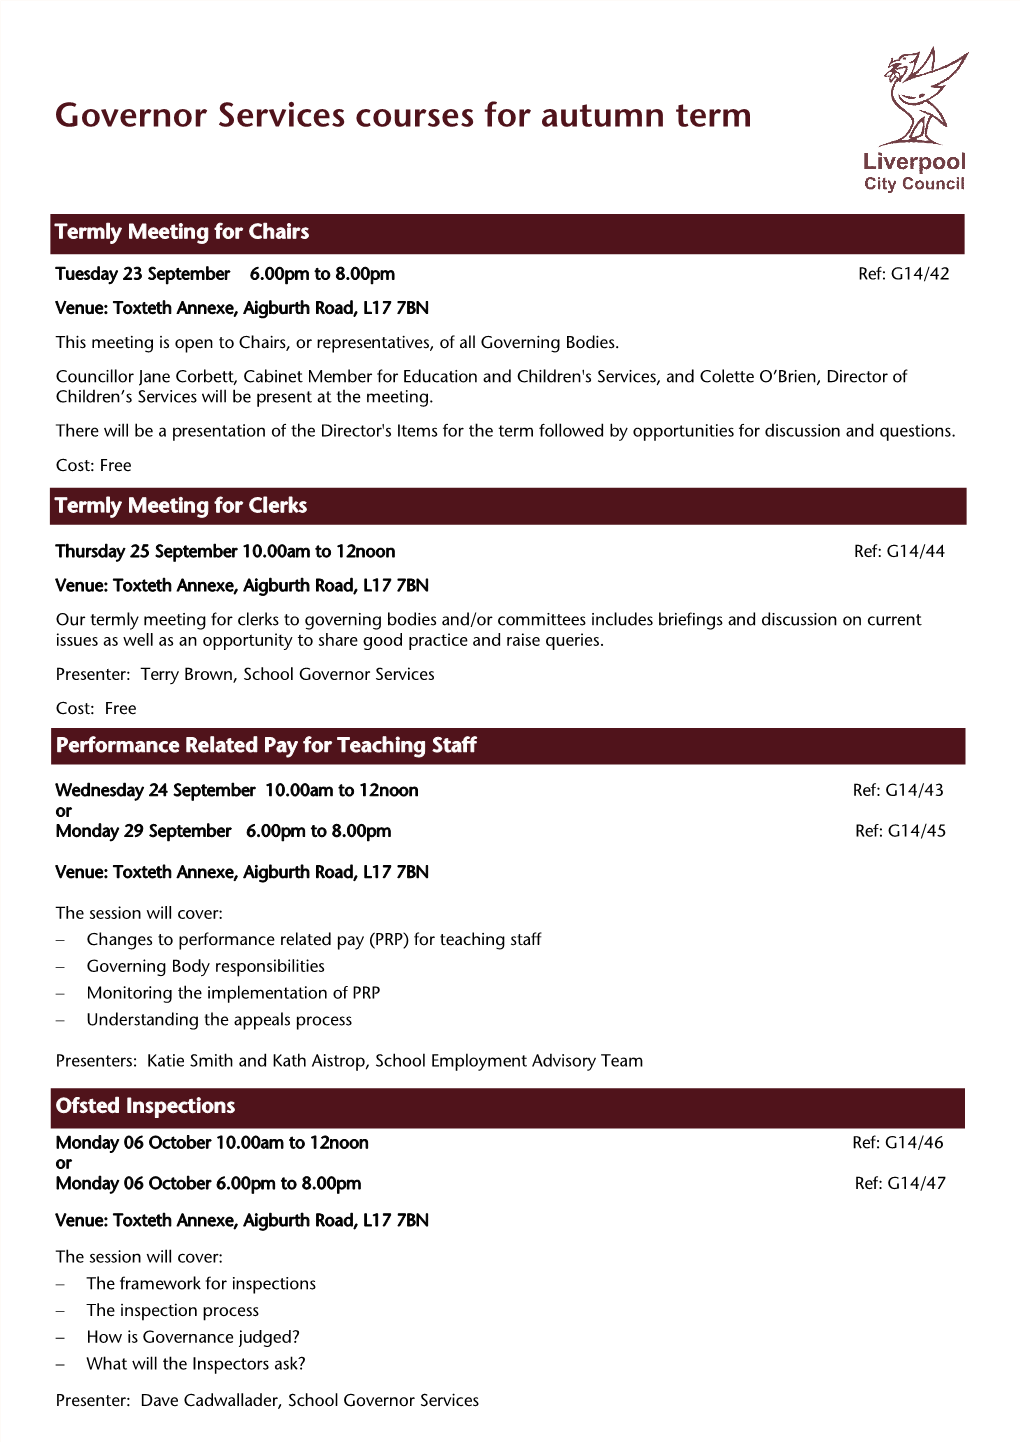 Governor Services Courses for Autumn Term